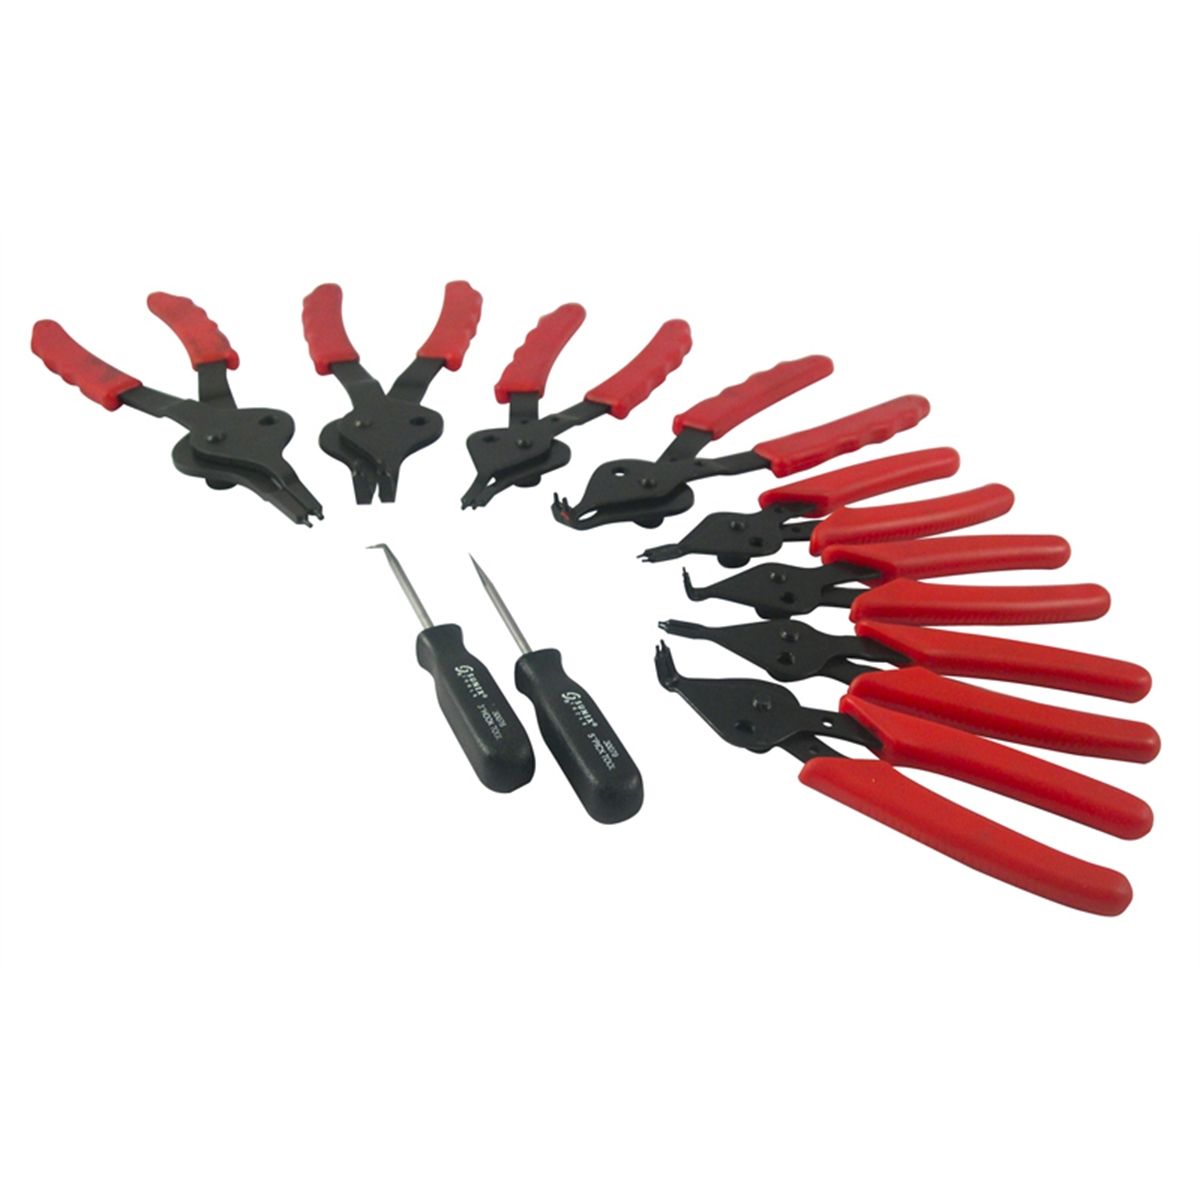 Snap Ring Pliers Set, 10 piece